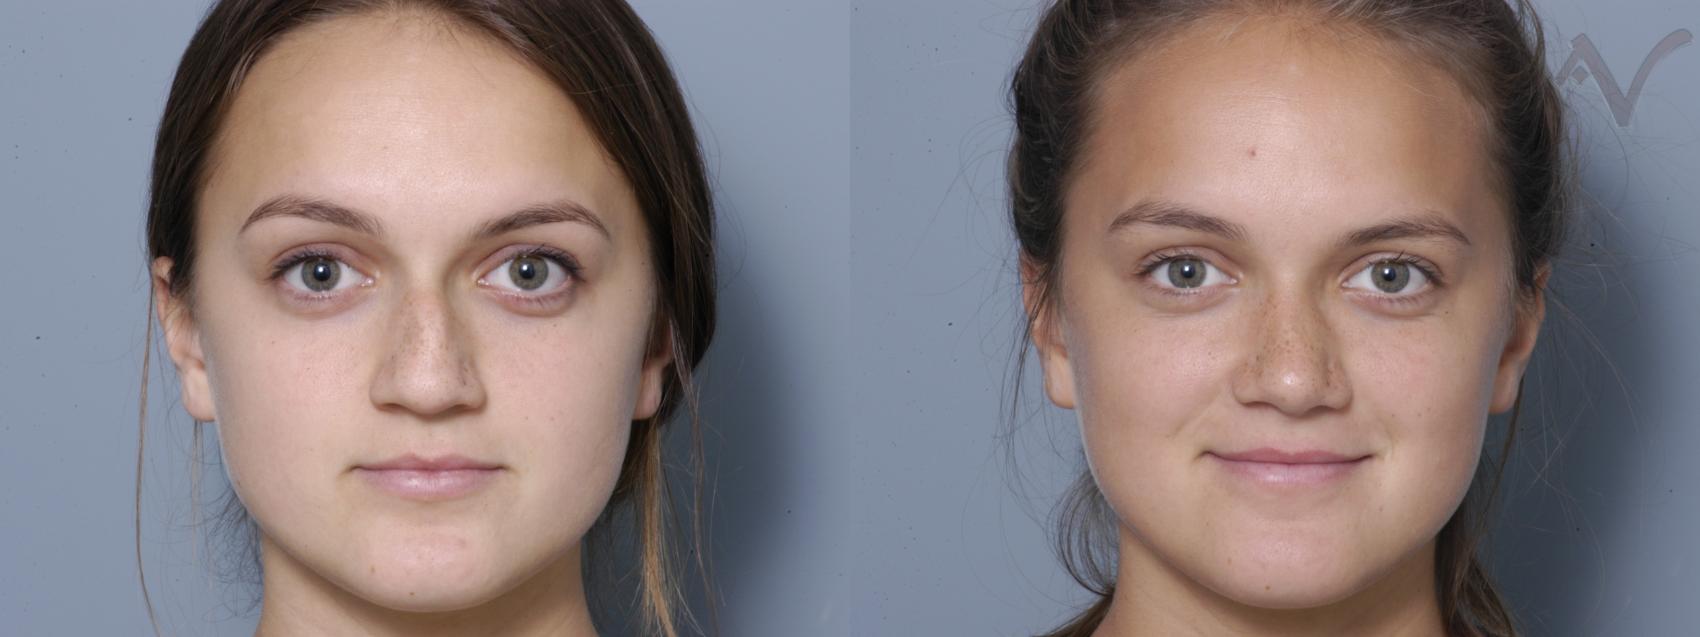 Before & After Rhinoplasty Case 3 Front View in Los Angeles, CA